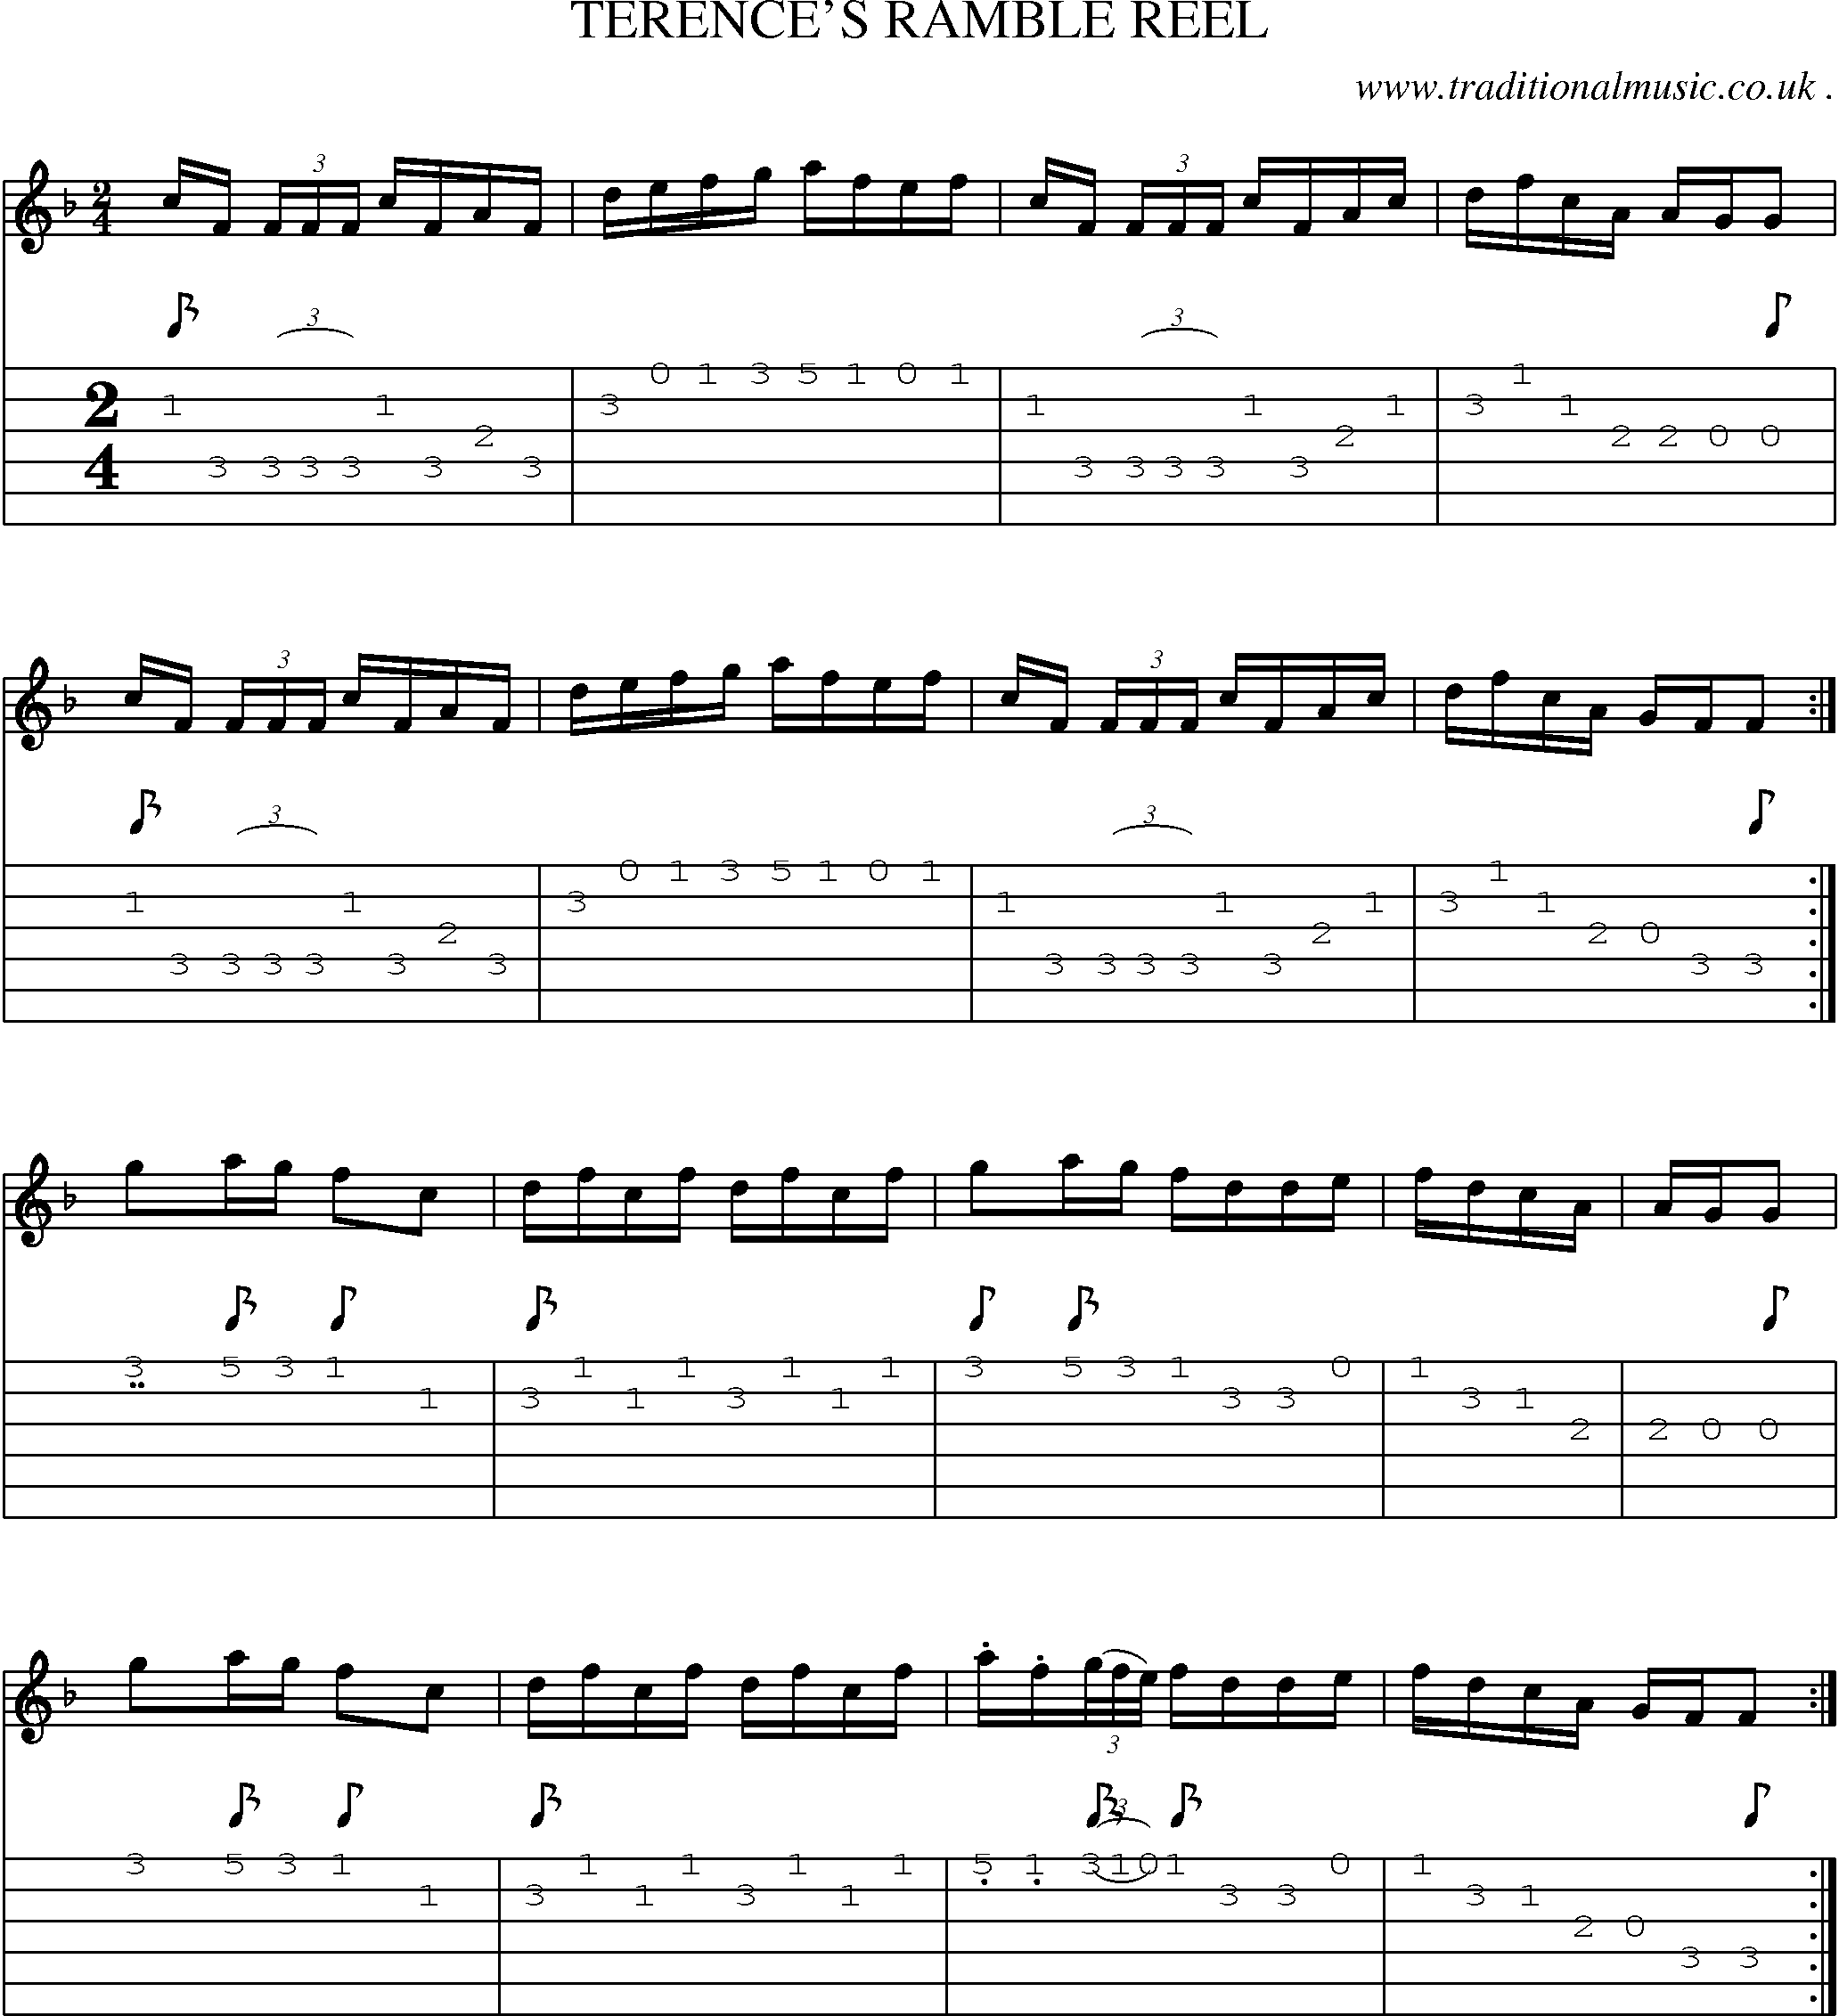 Sheet-Music and Guitar Tabs for Terences Ramble Reel